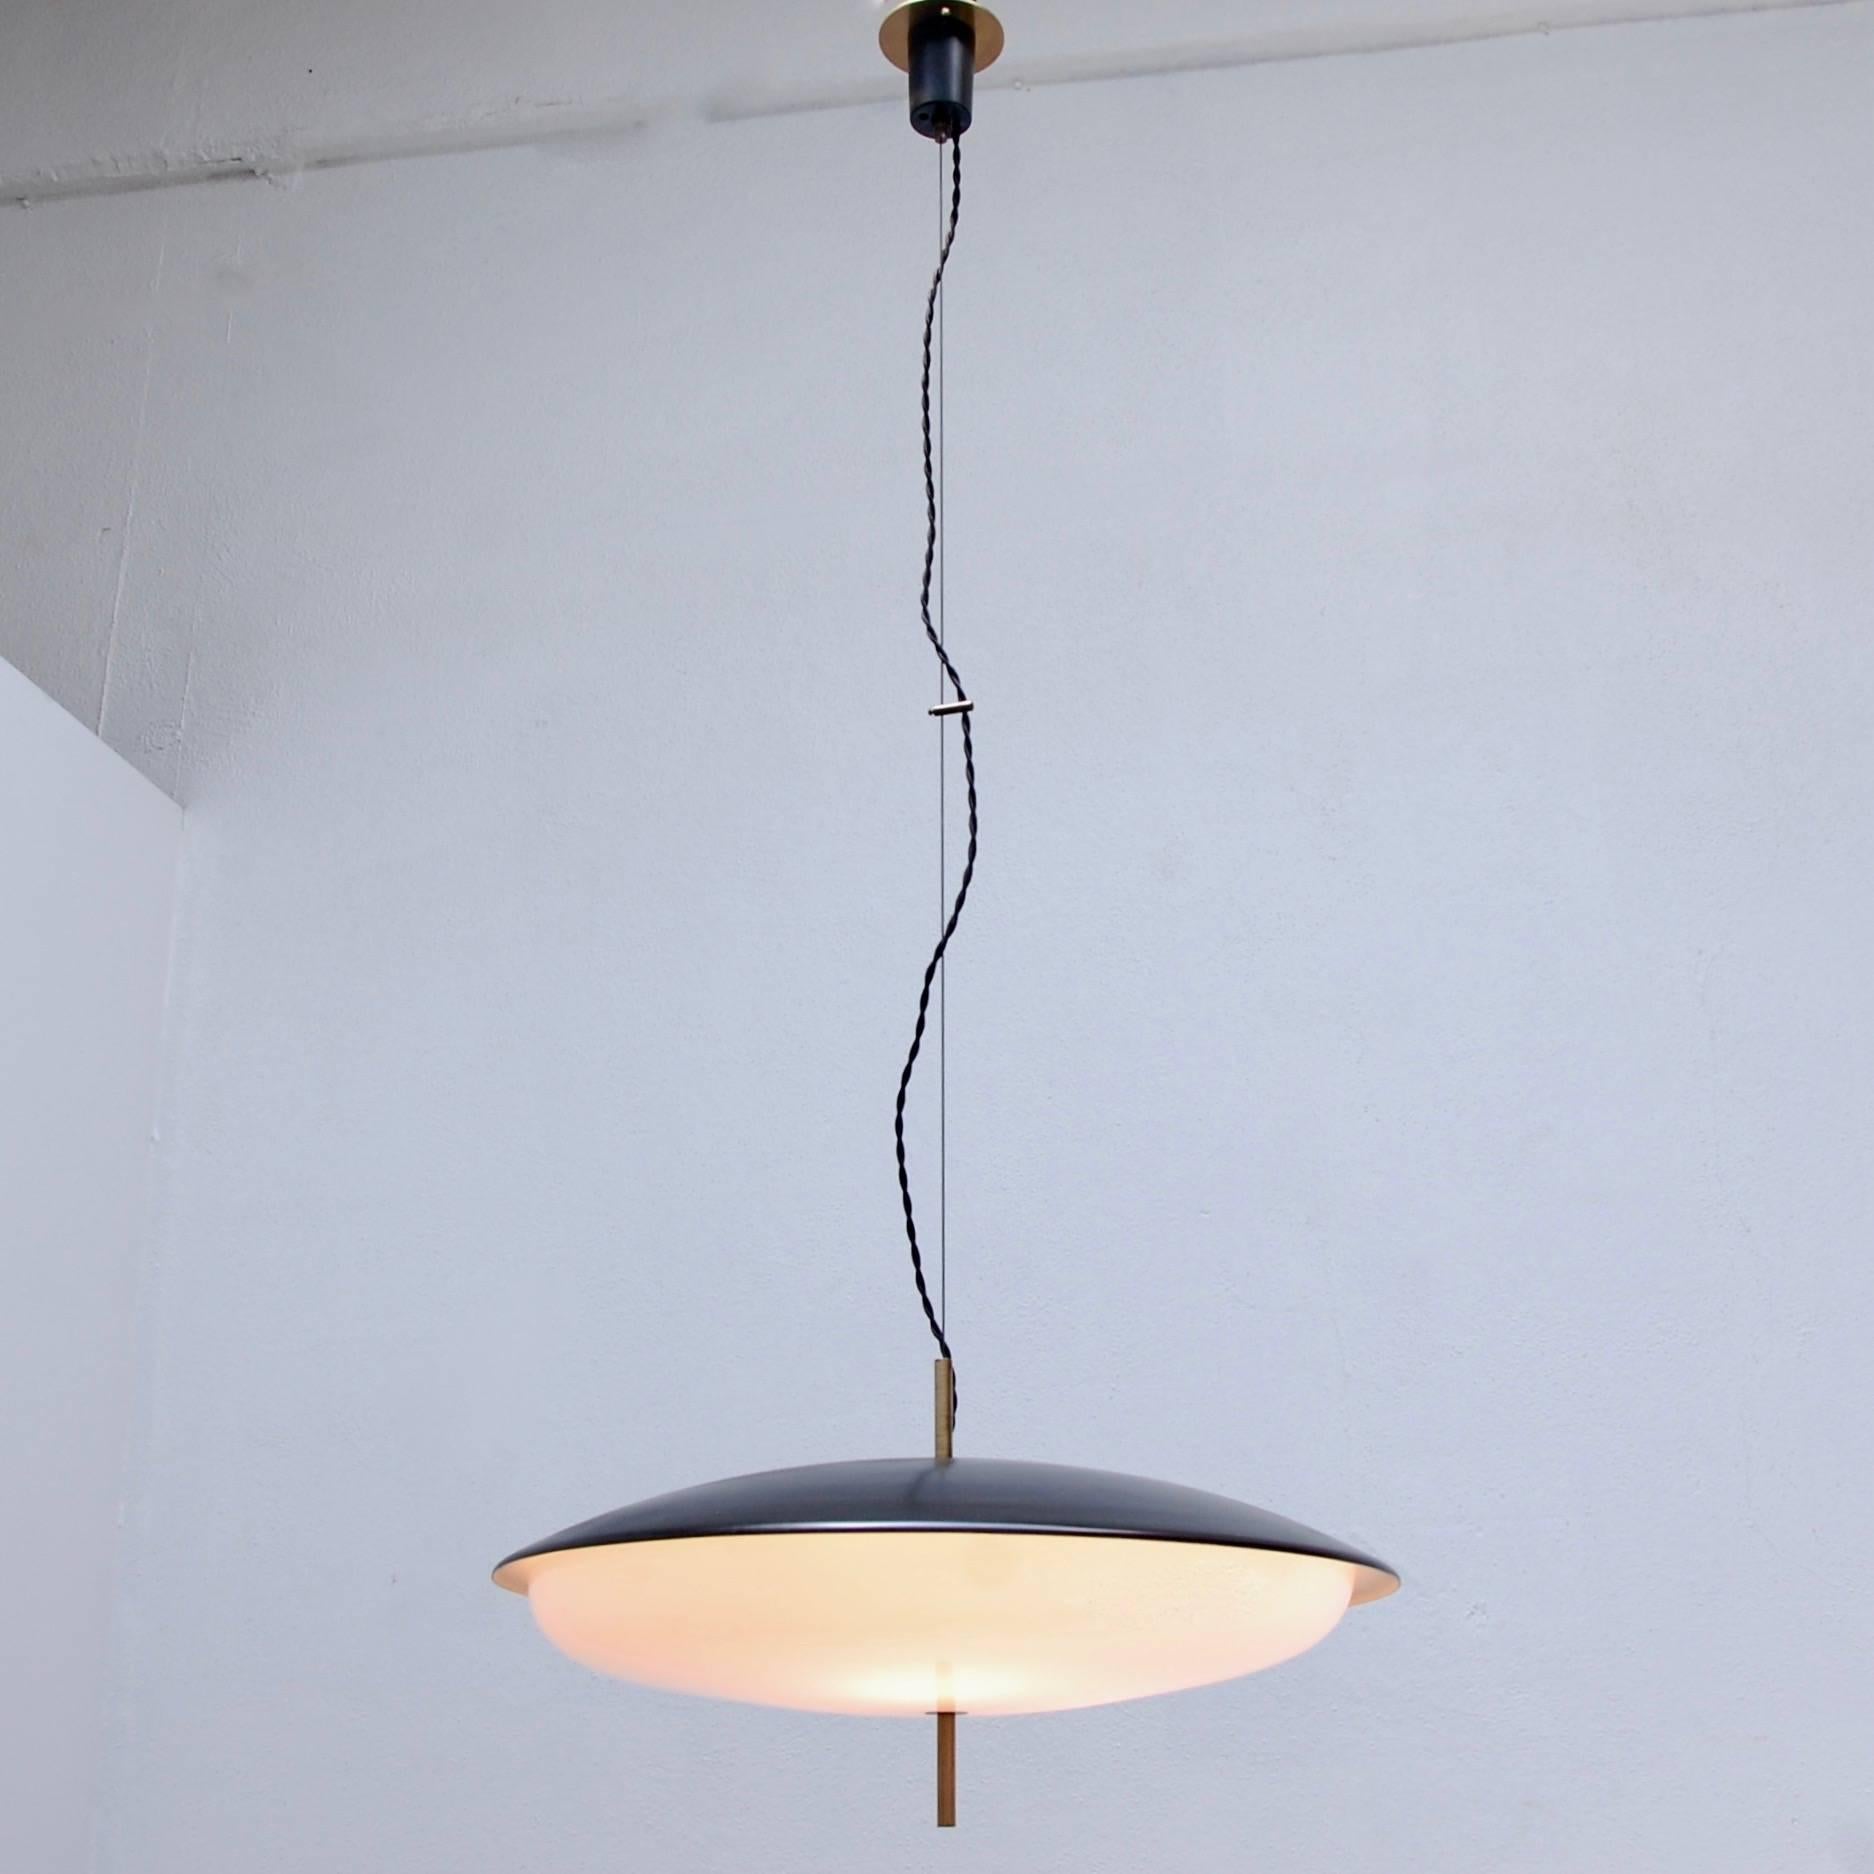 Classic and elegant midcentury Italian Stilnovo pendant in brass, painted aluminum and Lucite (diffuser). Currently wired for the US. Three medium-based E26 sockets. Overall drop adjustable upon request.
Measurements:
Fixture height 12”
Diameter